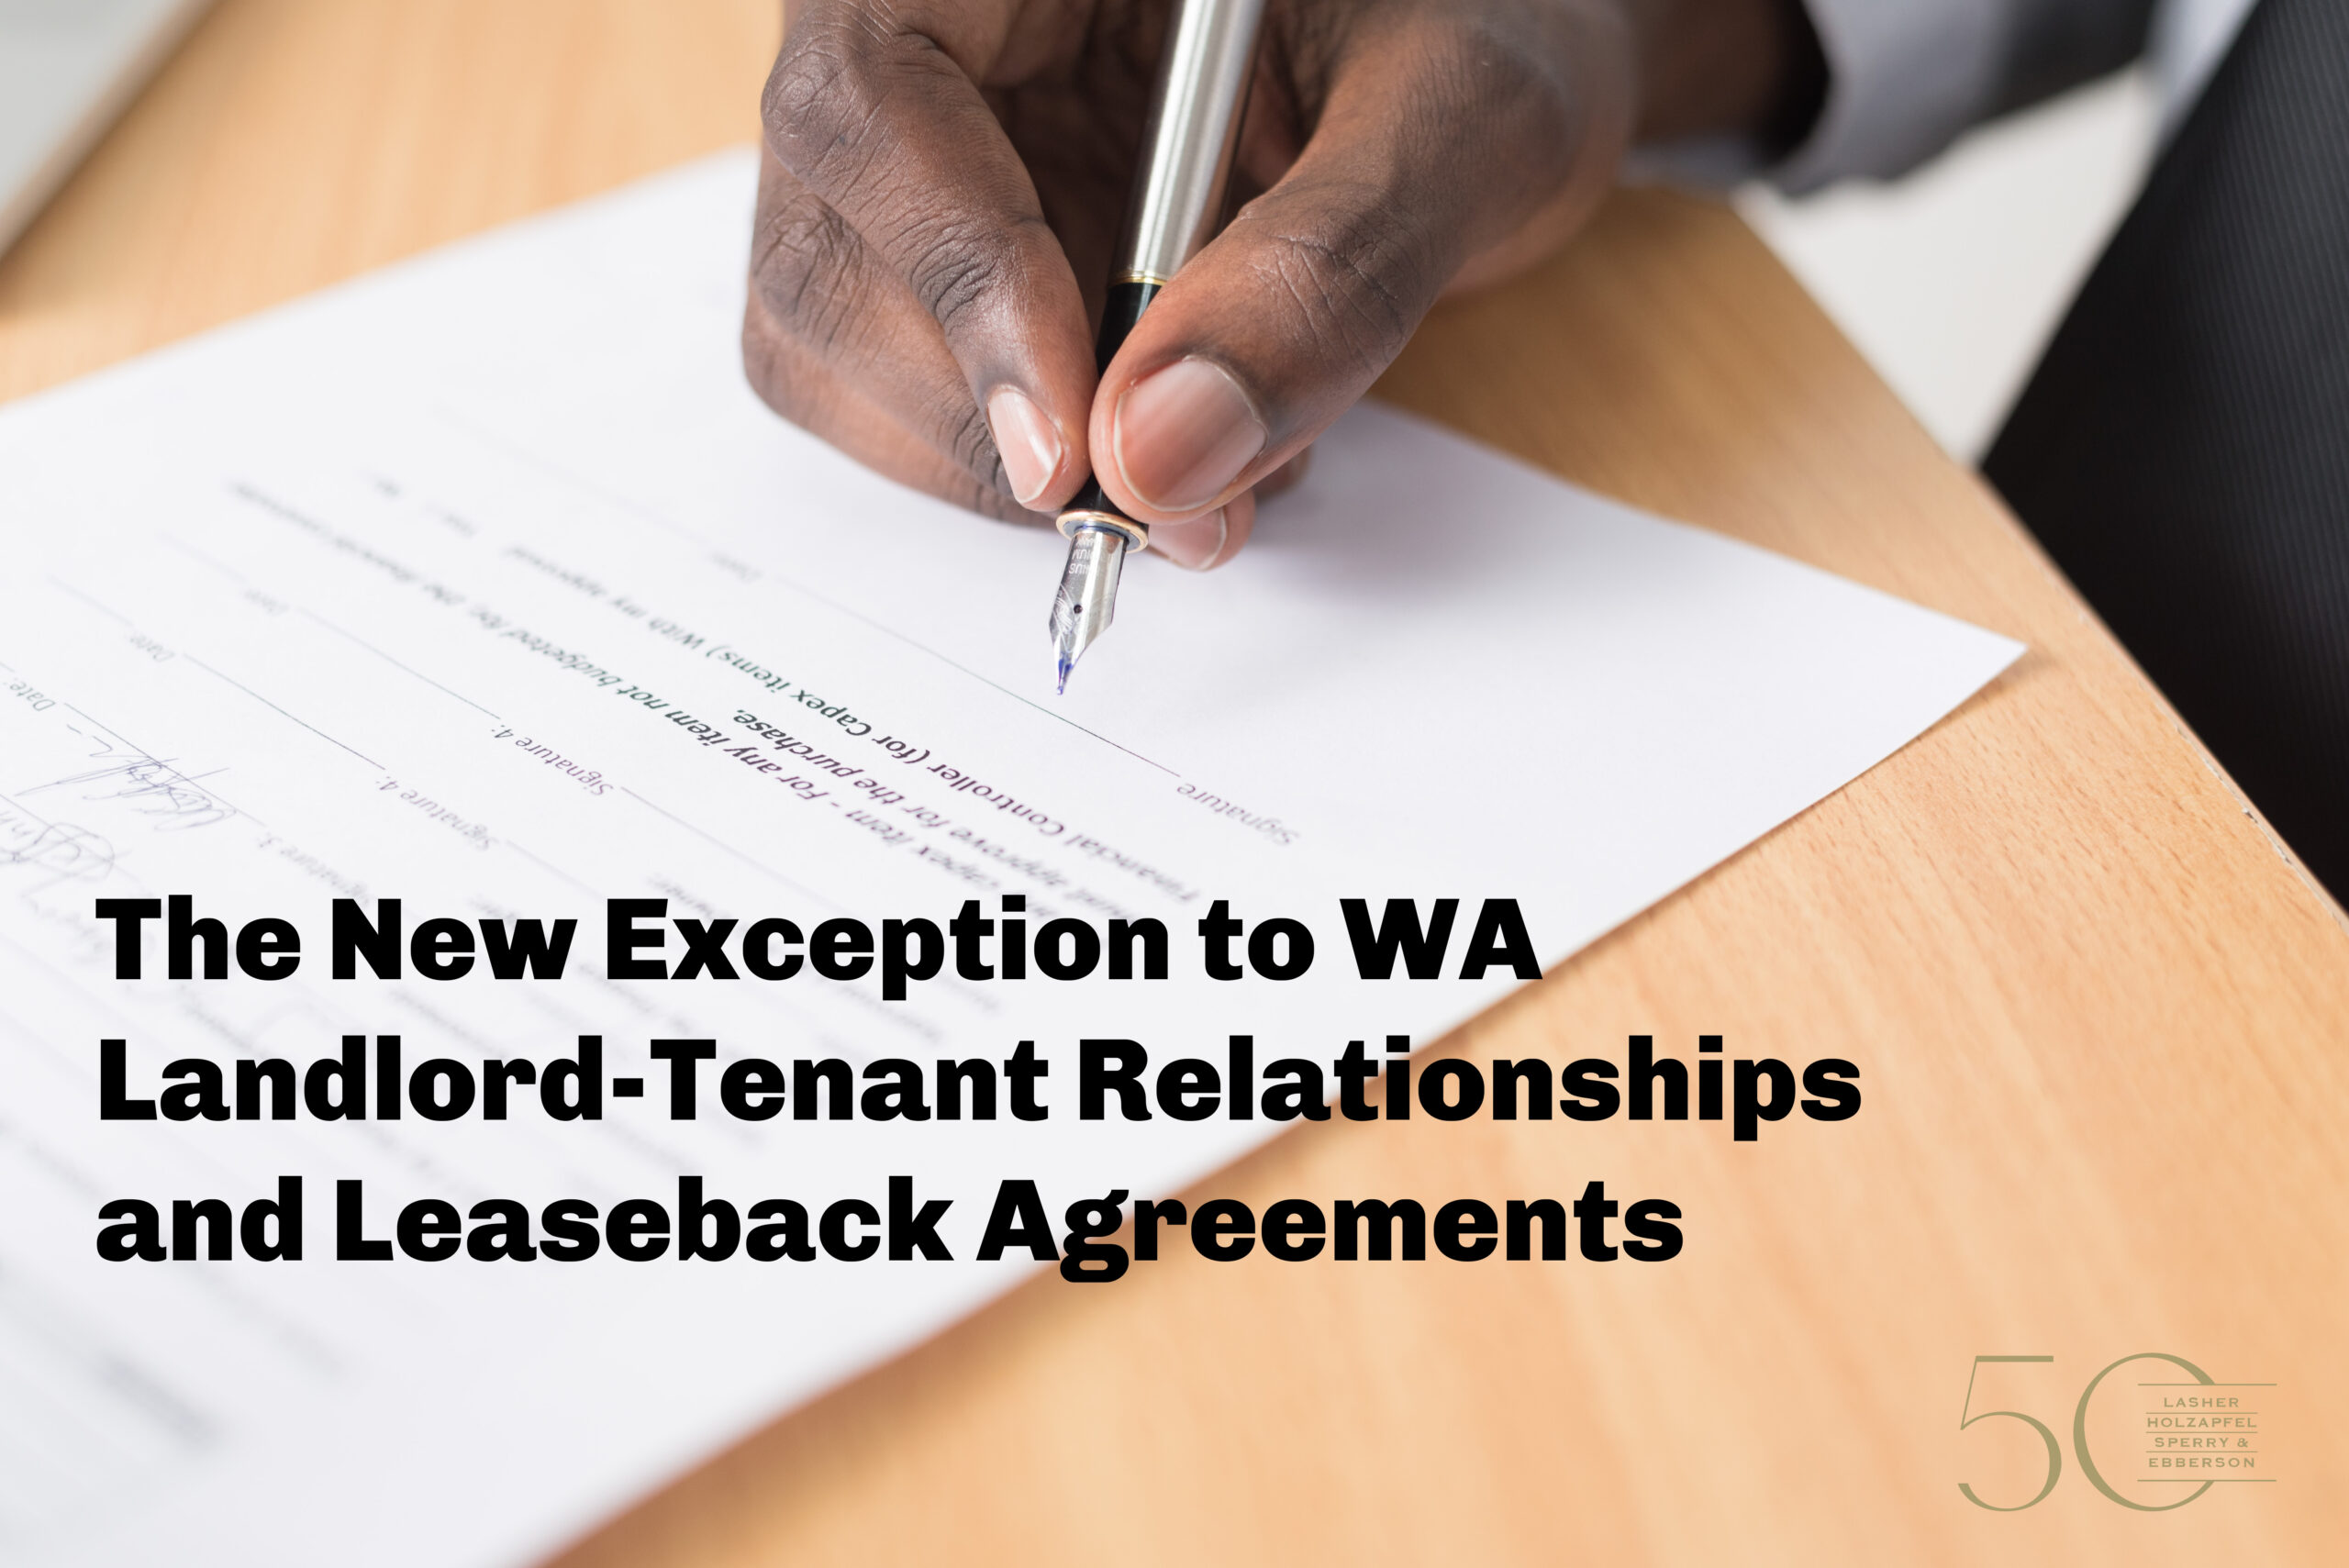 The New Exception to Washington Landlord-Tenant Relationships and Leaseback Agreements